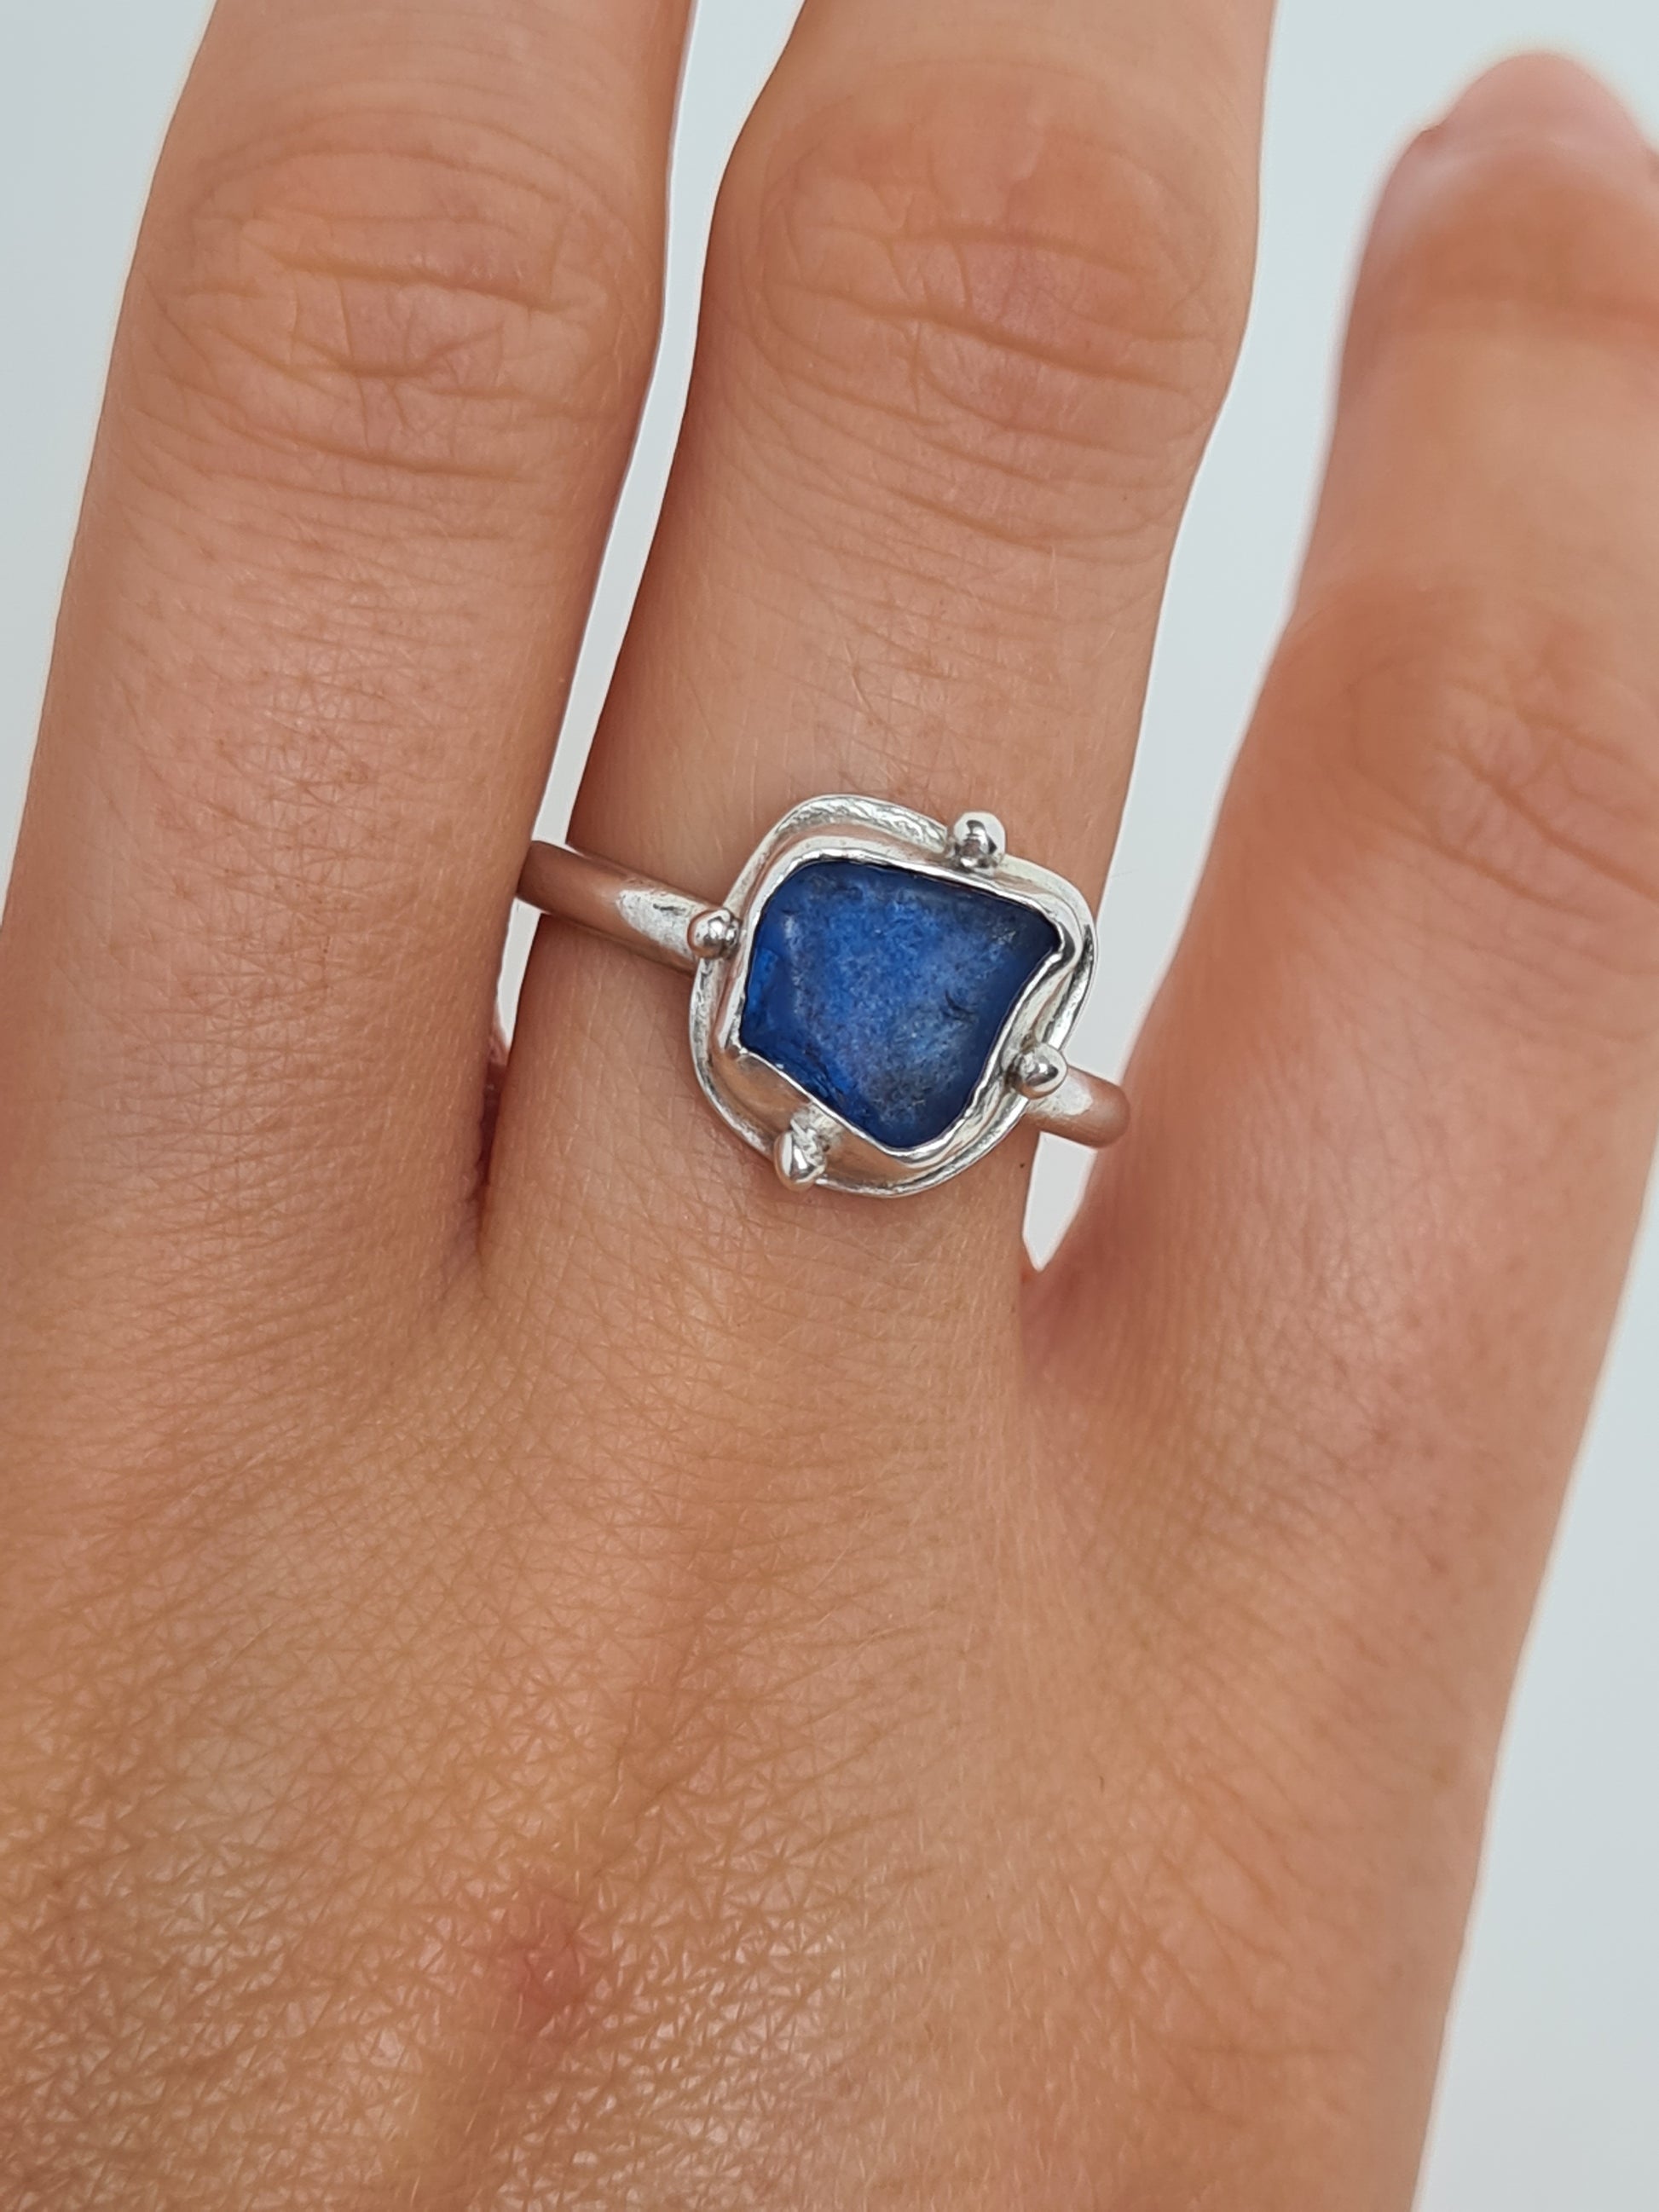 This vibrant royal blue sea gem is nestled in a sterling silver bezel with subtle embellishments and set upon an elegant D shaped band. Crafted with sustainability in mind this silver ring is handmade from 100% recycled silver.